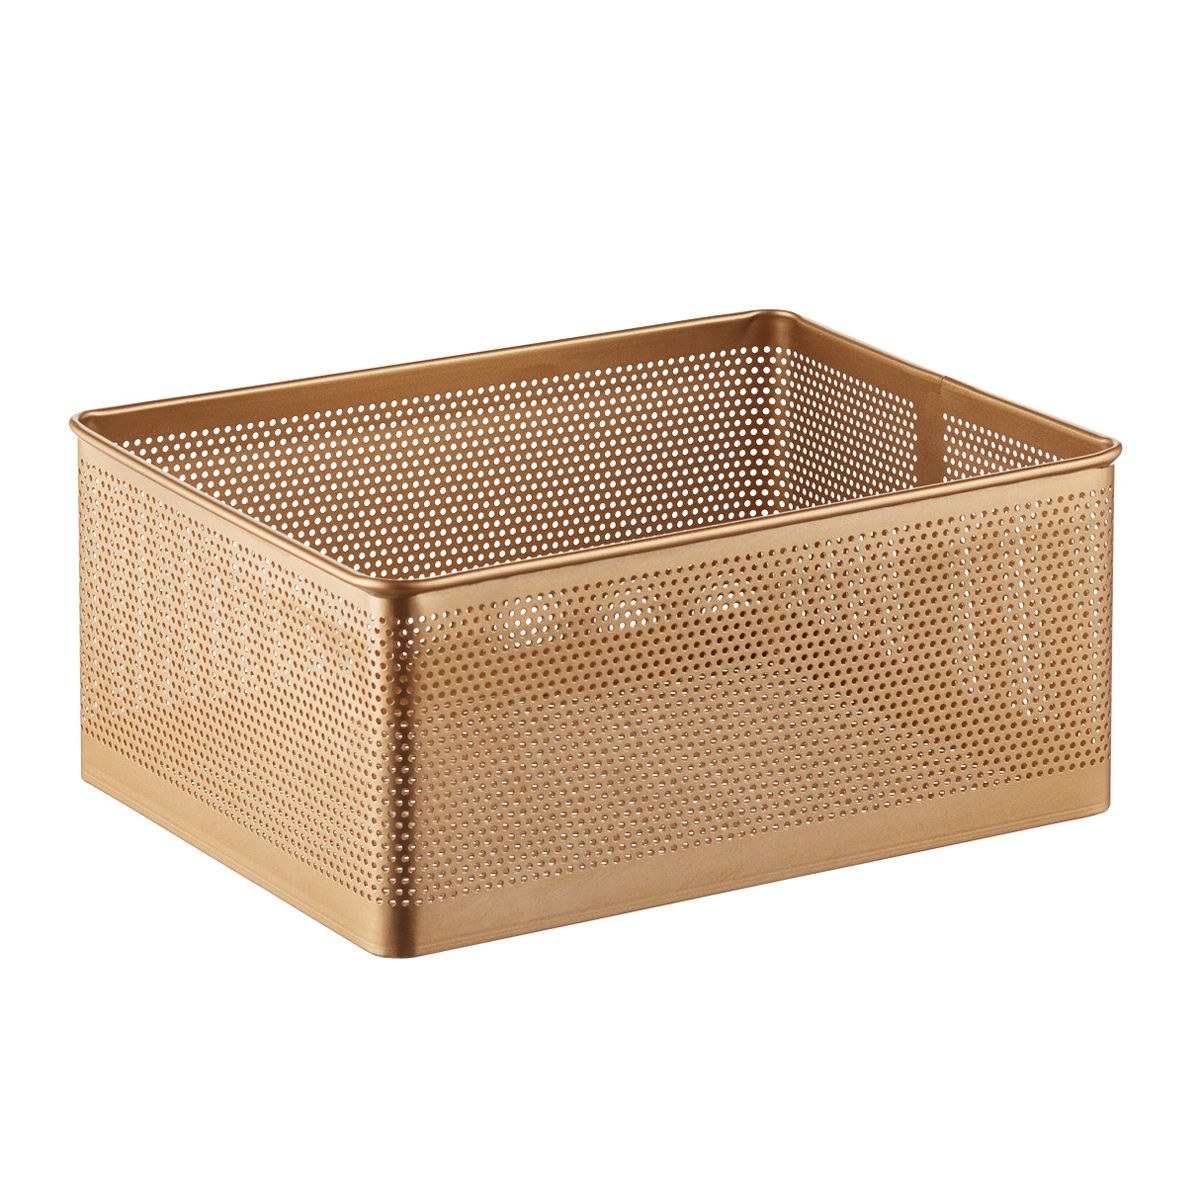 The Container Store Wide Serena Stamped Metal Bin Gold | The Container Store